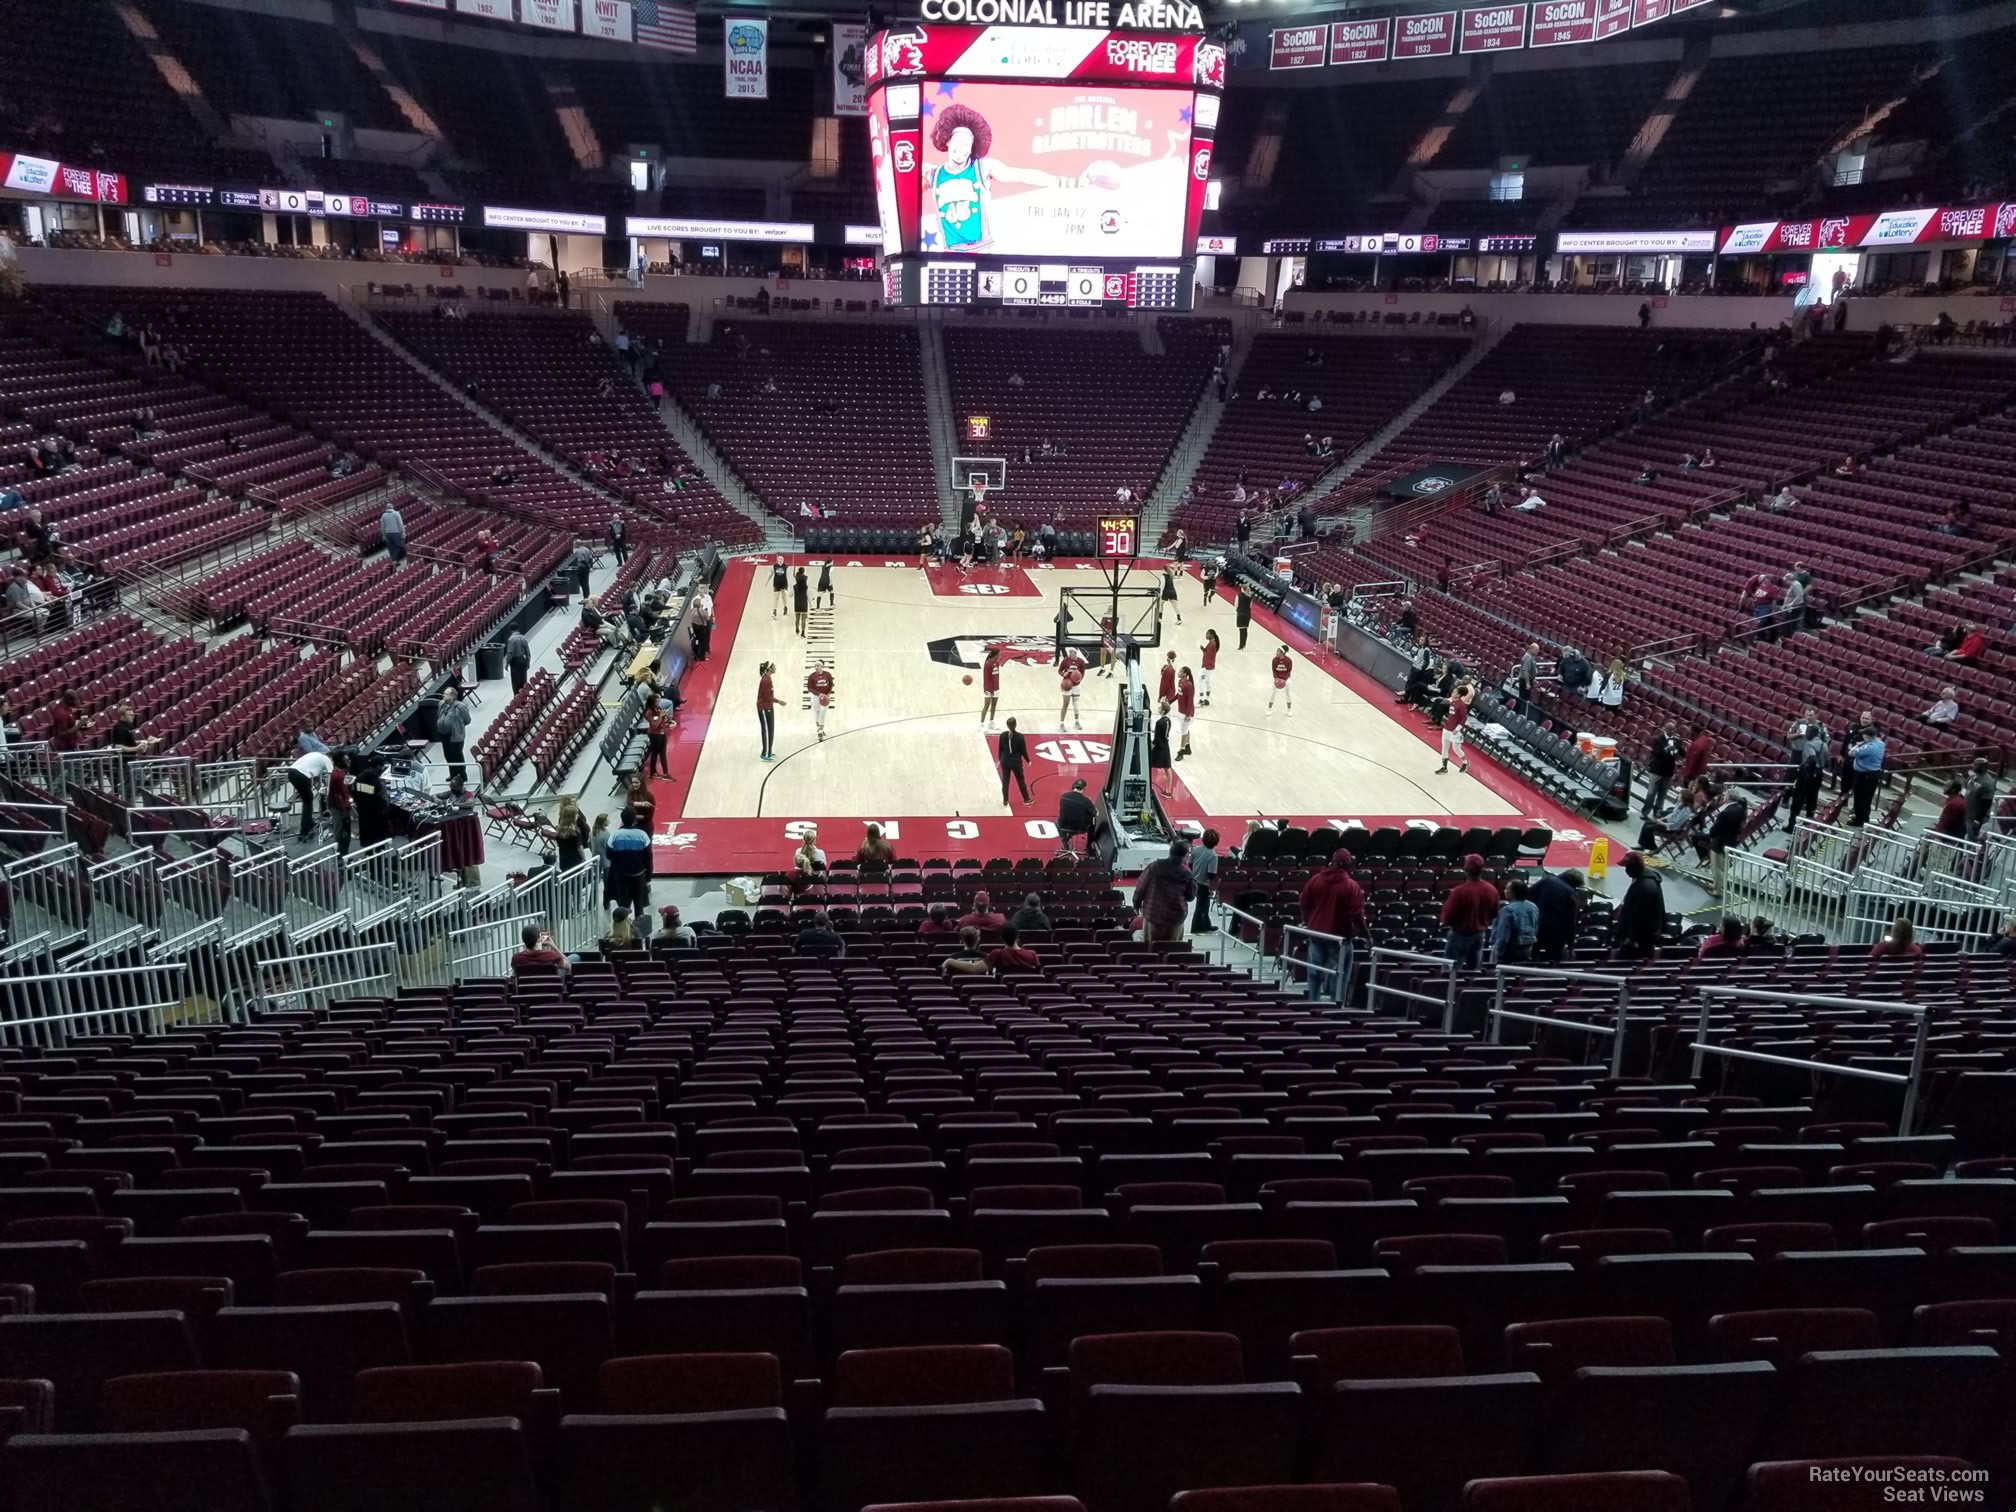 section 110, row 25 seat view  for basketball - colonial life arena